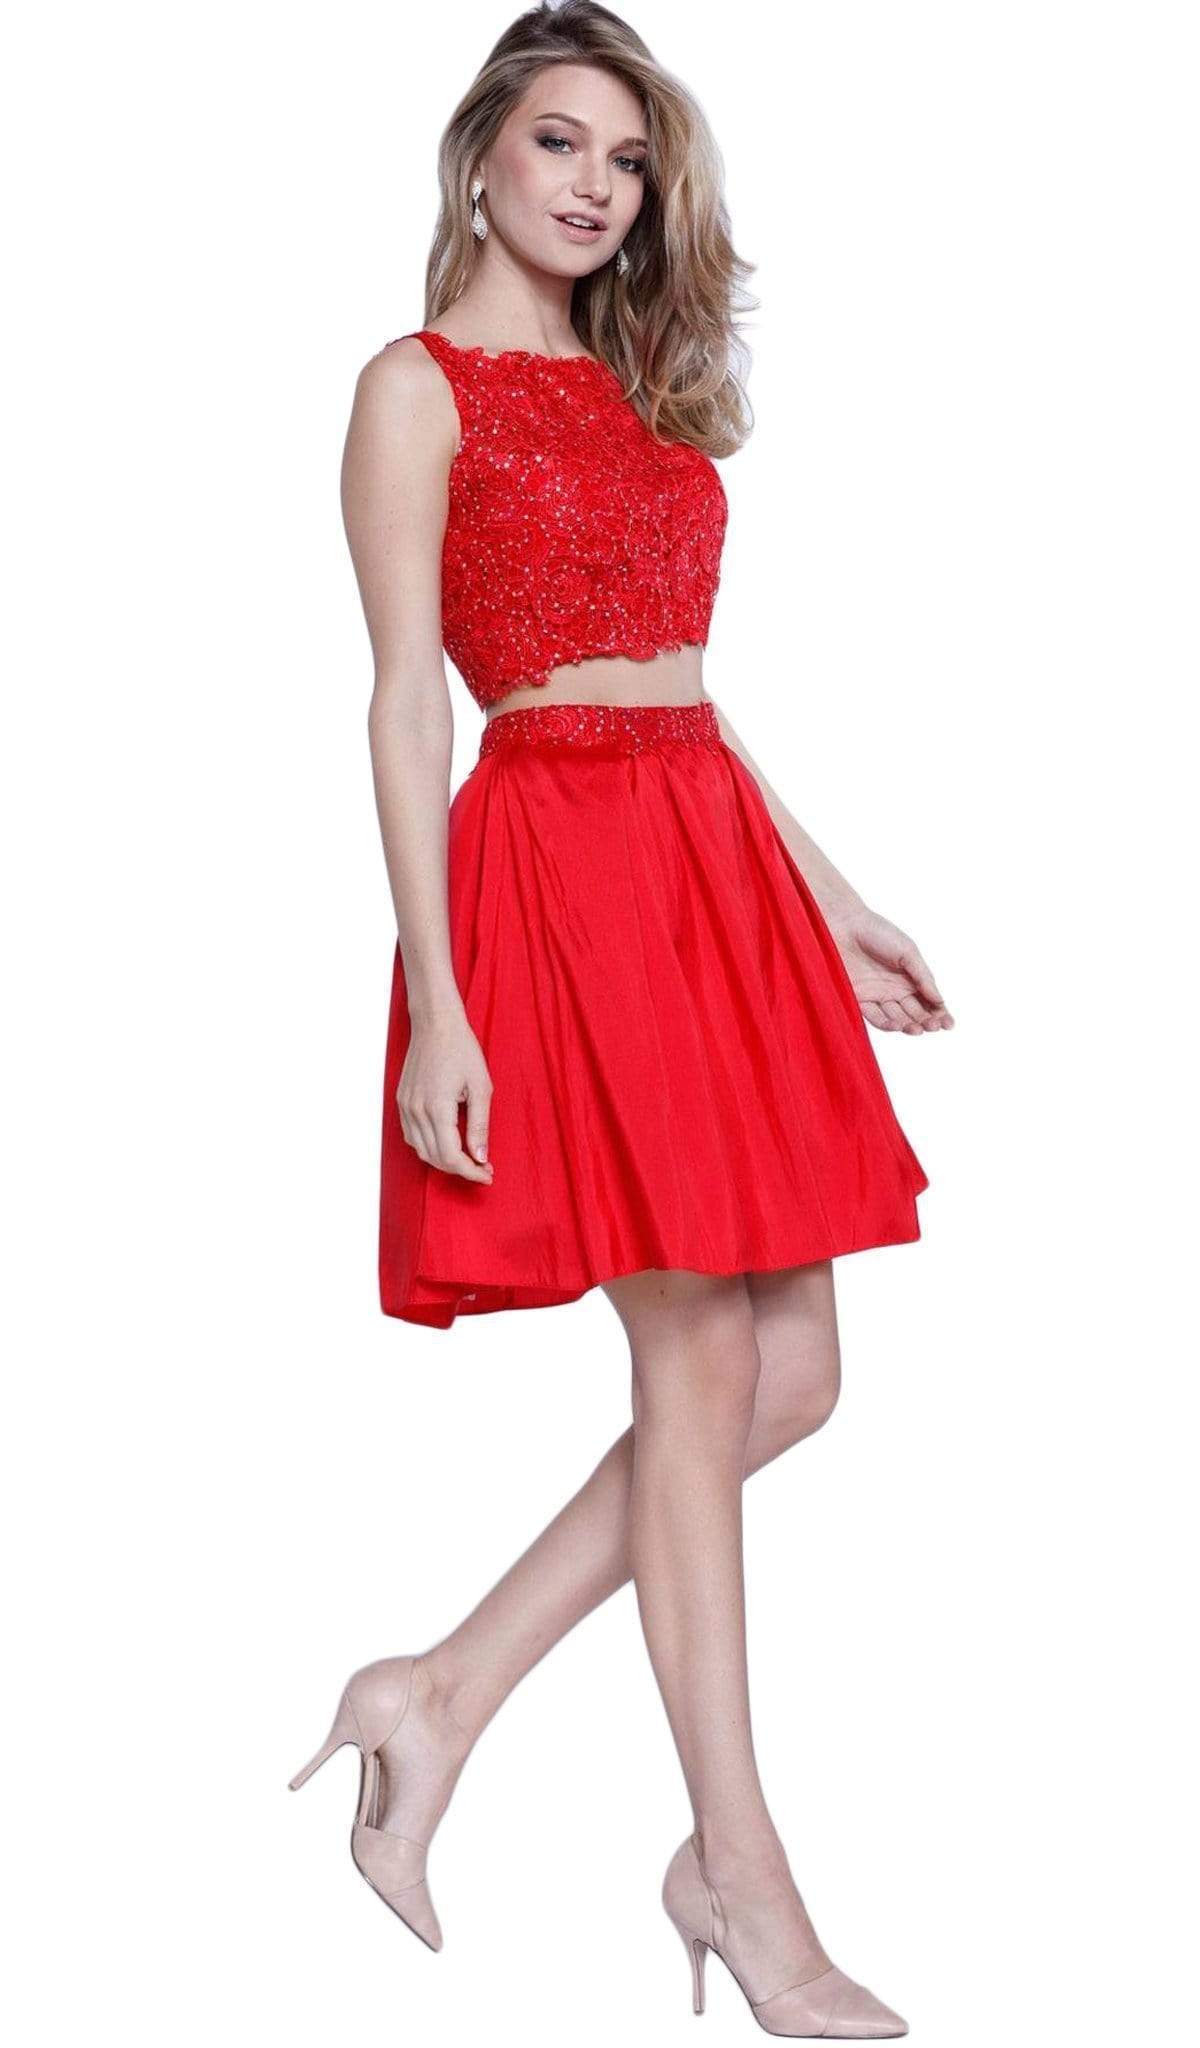 Nox Anabel - 6054 Embellished Bateau Neck Dress Special Occasion Dress XS / Red